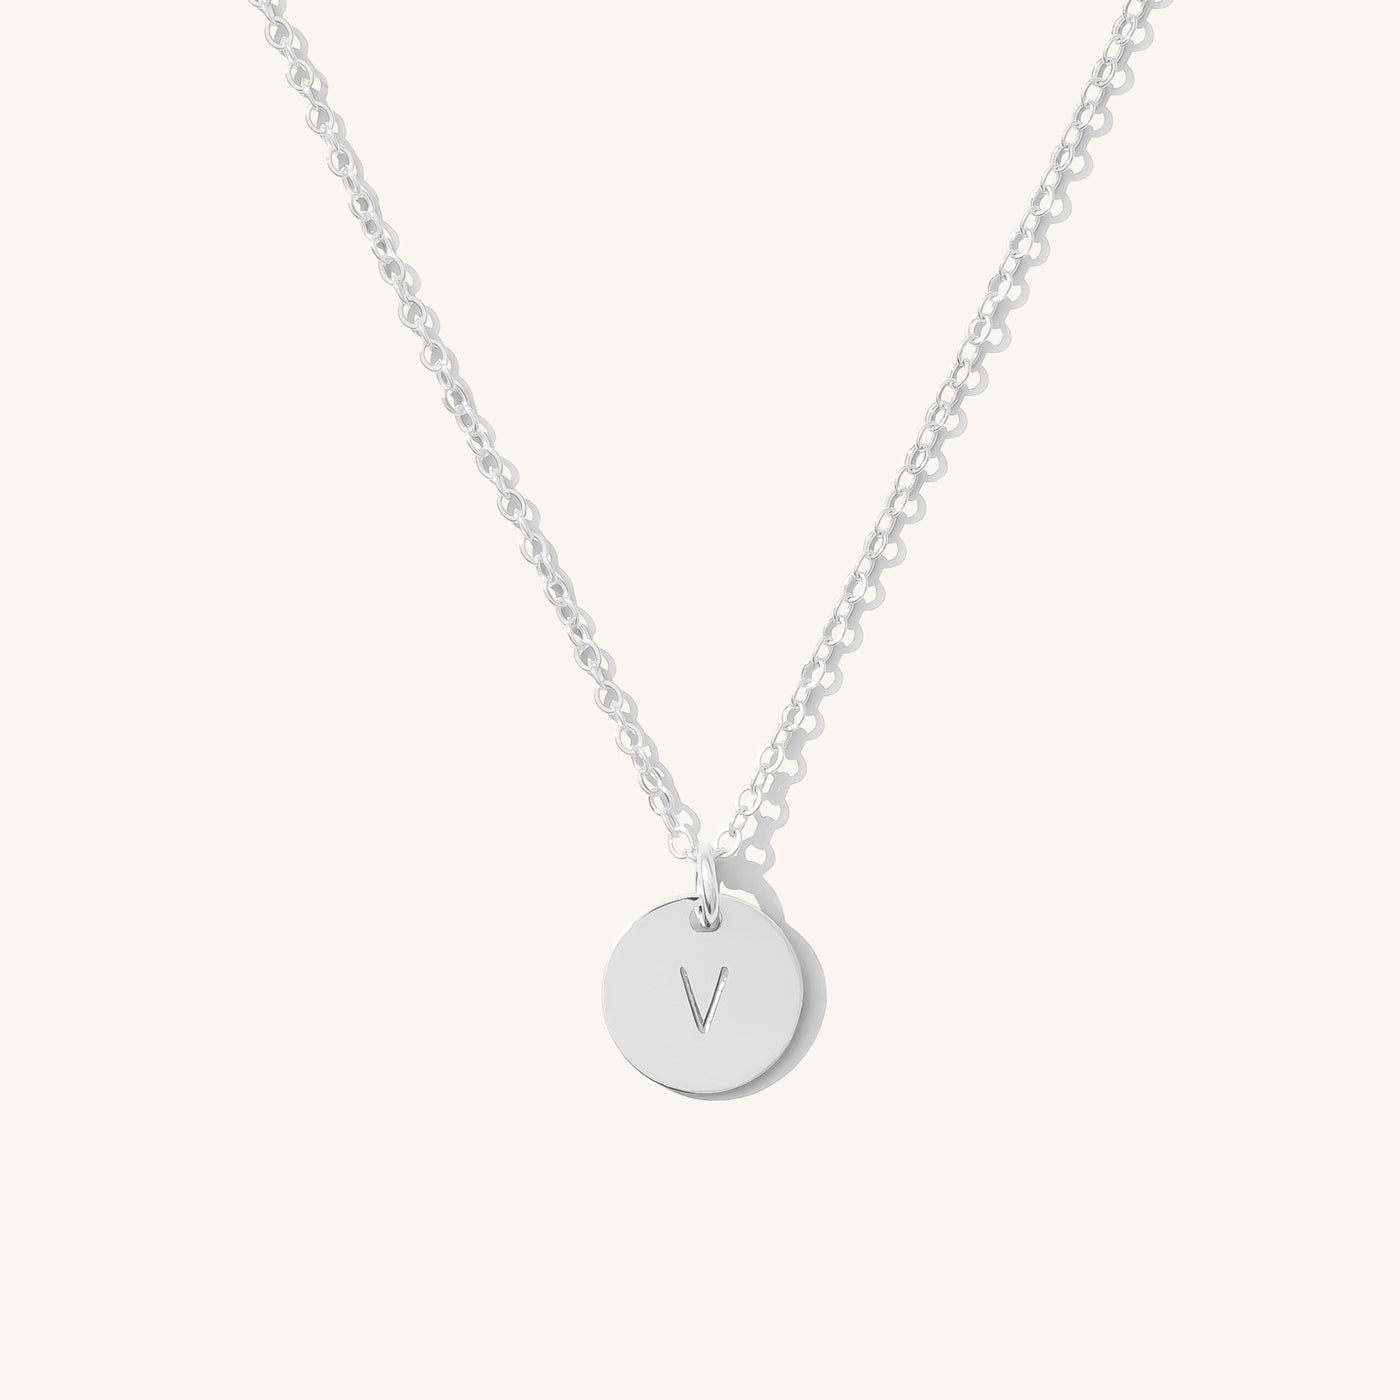 V Dainty Initial Necklace